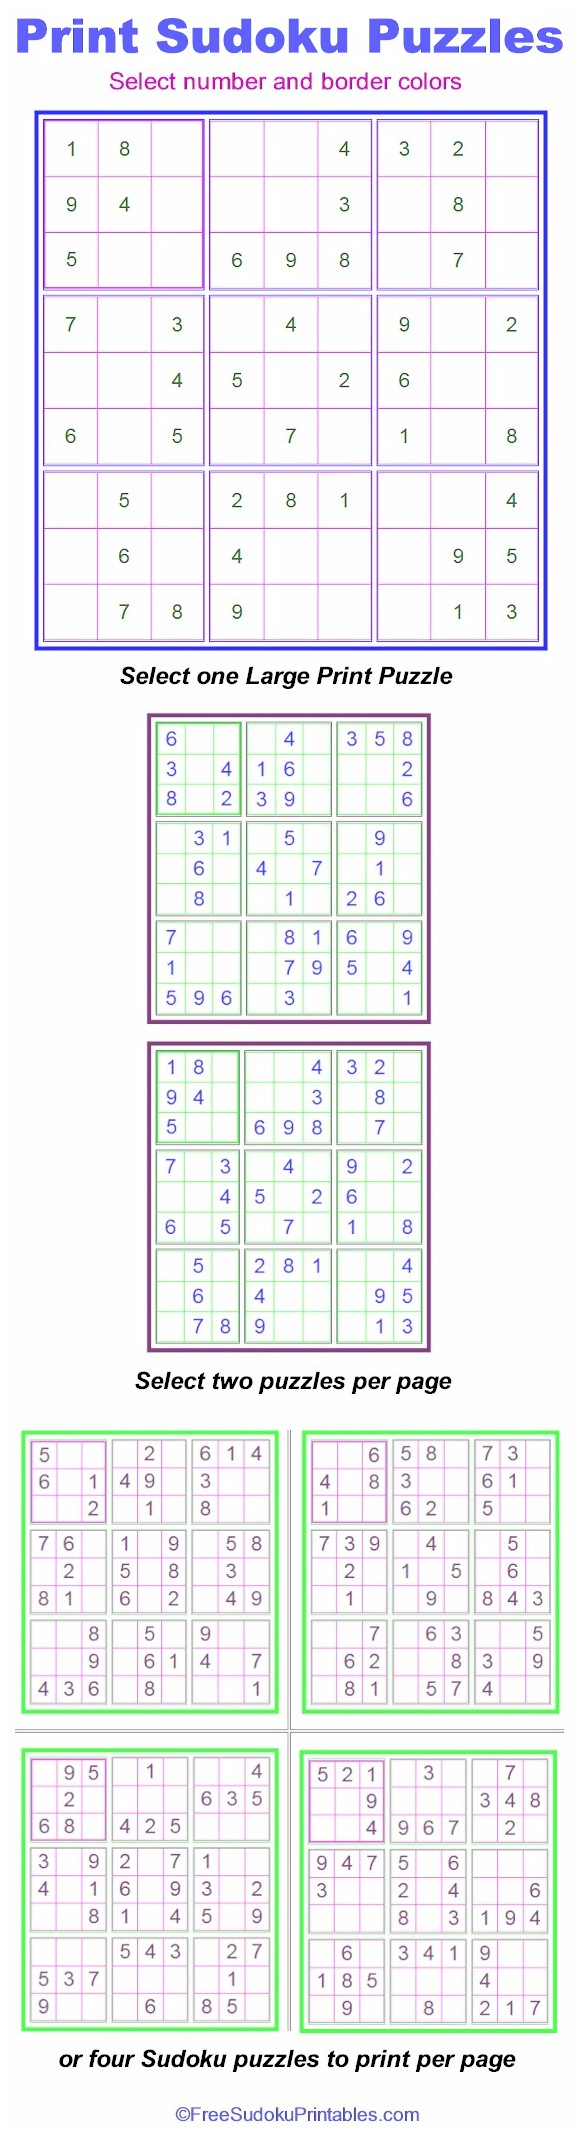 Print Sudoku Puzzles - Hundreds Of Sudoku Puzzles That You Can Print - Free Printable Sudoku 4 Per Page